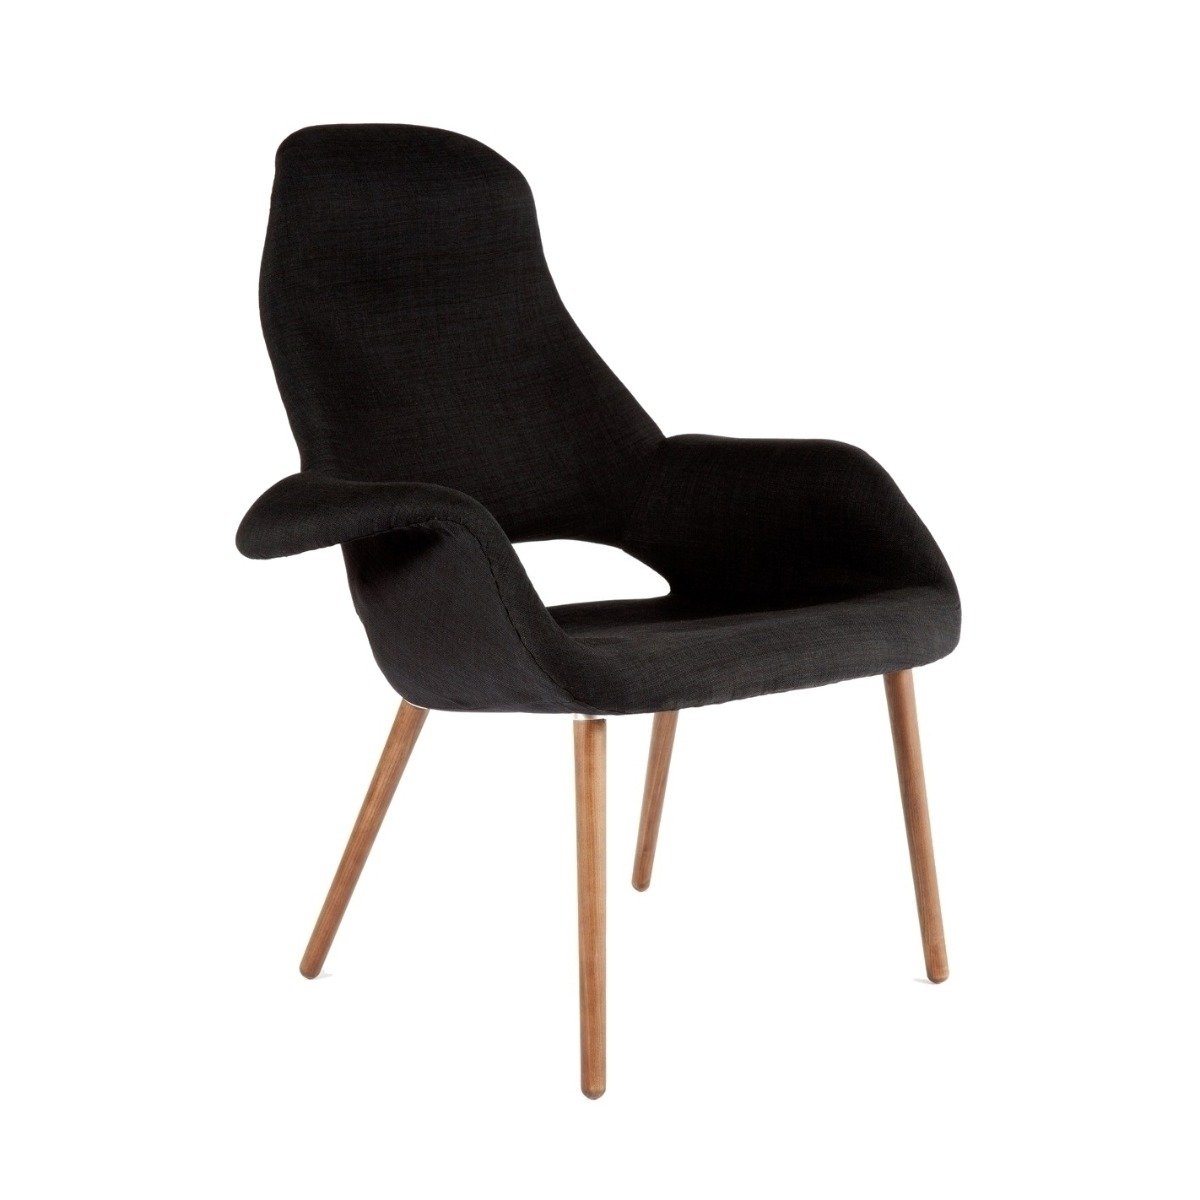 Salamanca Armchair Tall - Black Furniture-Dining Room-Dining & Side Chairs